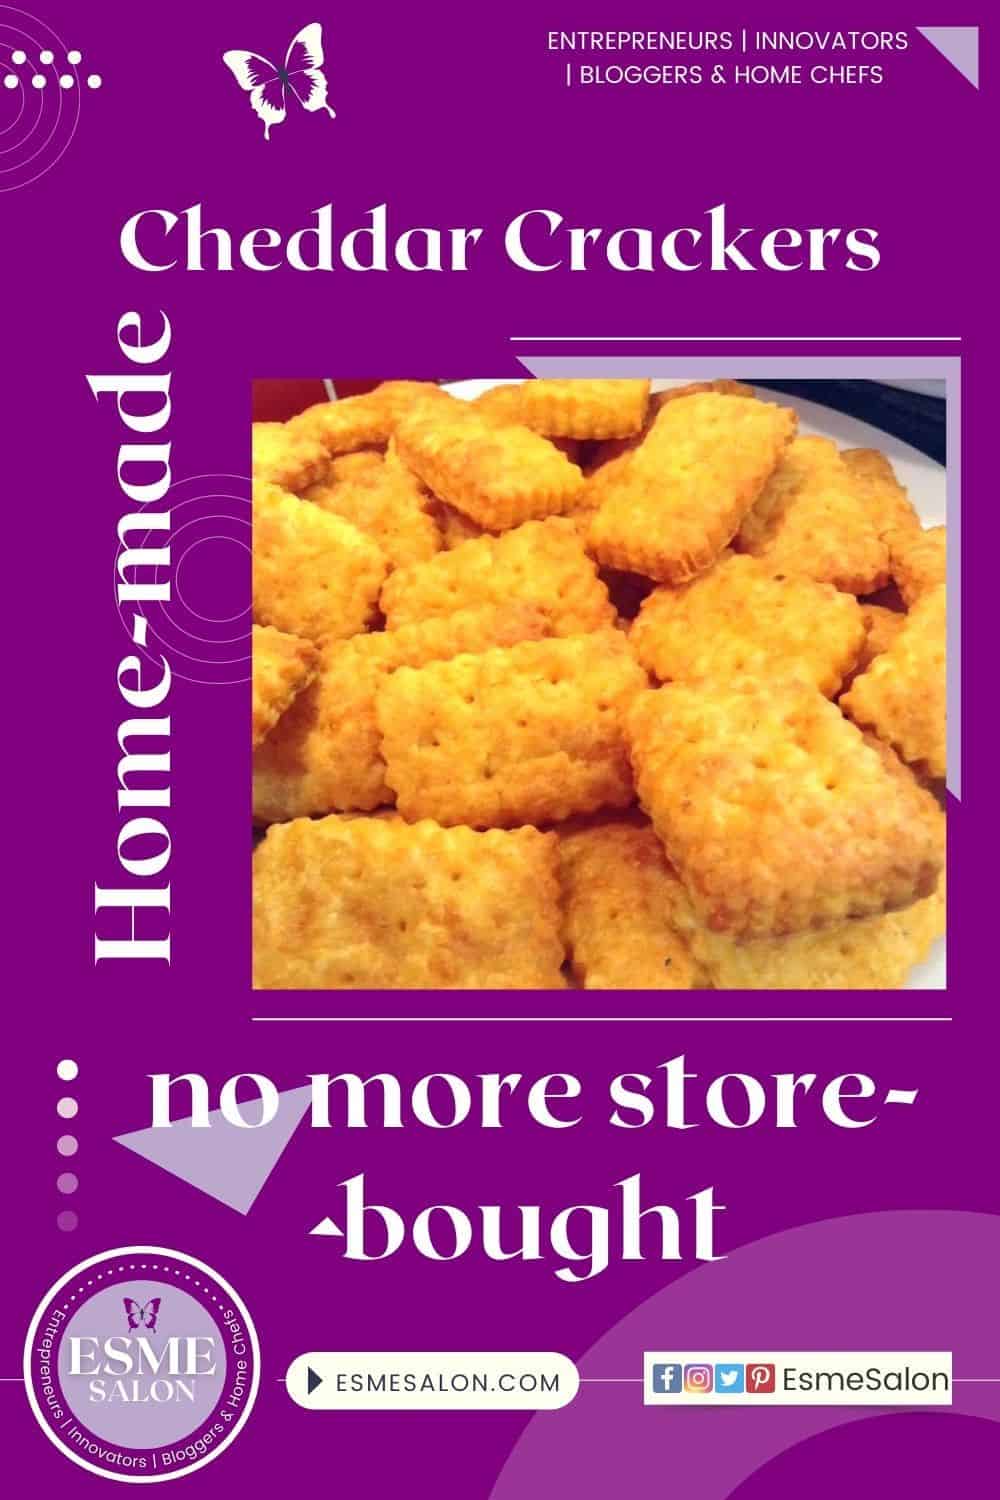 Cheddar Crackers, little pockets of lightness and better than store-bought